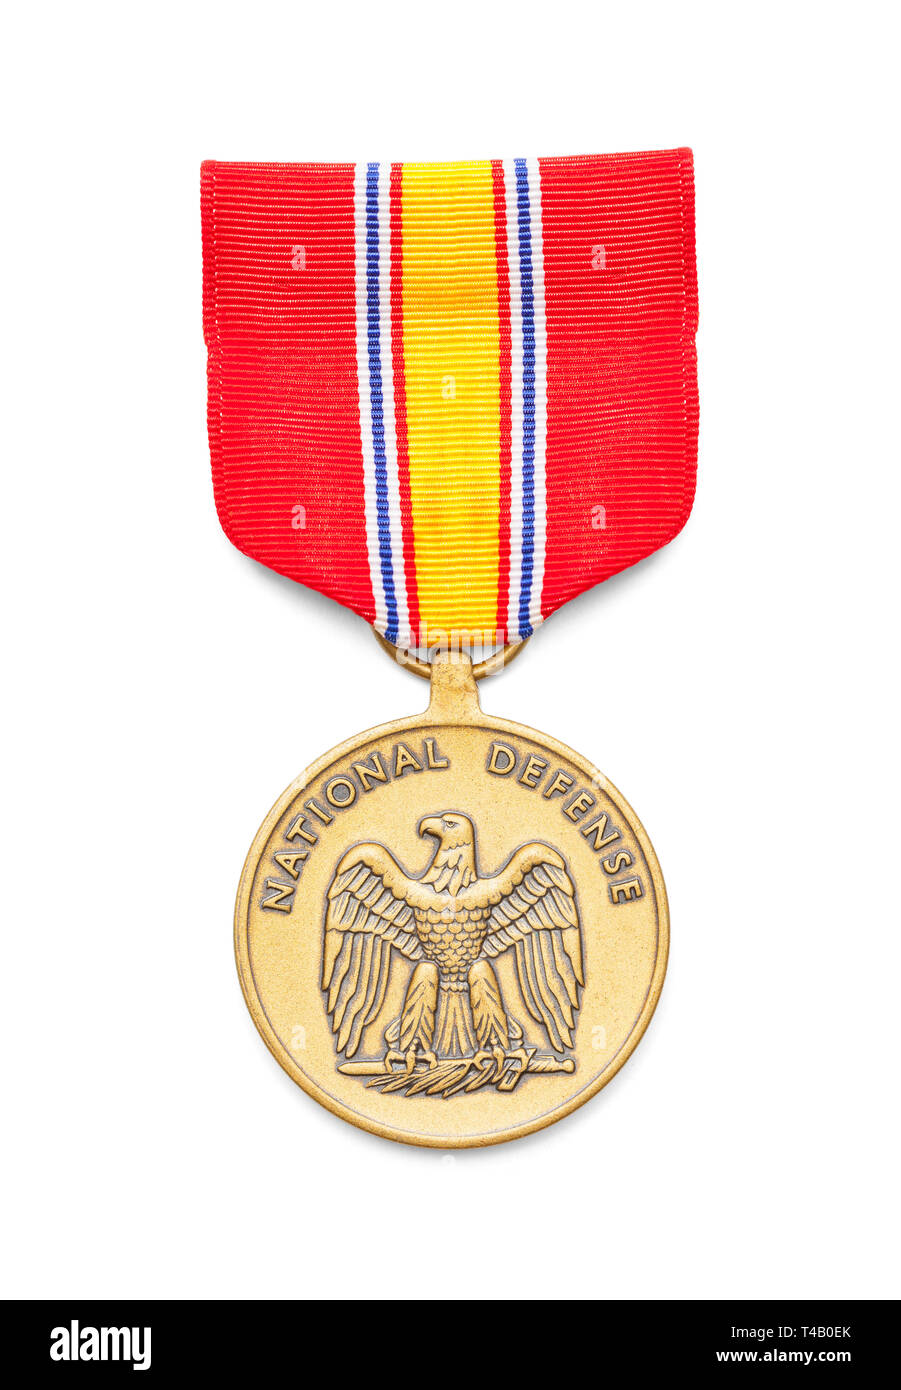 United States Air Force National Defense Medal Cut Out on White. Stock Photo